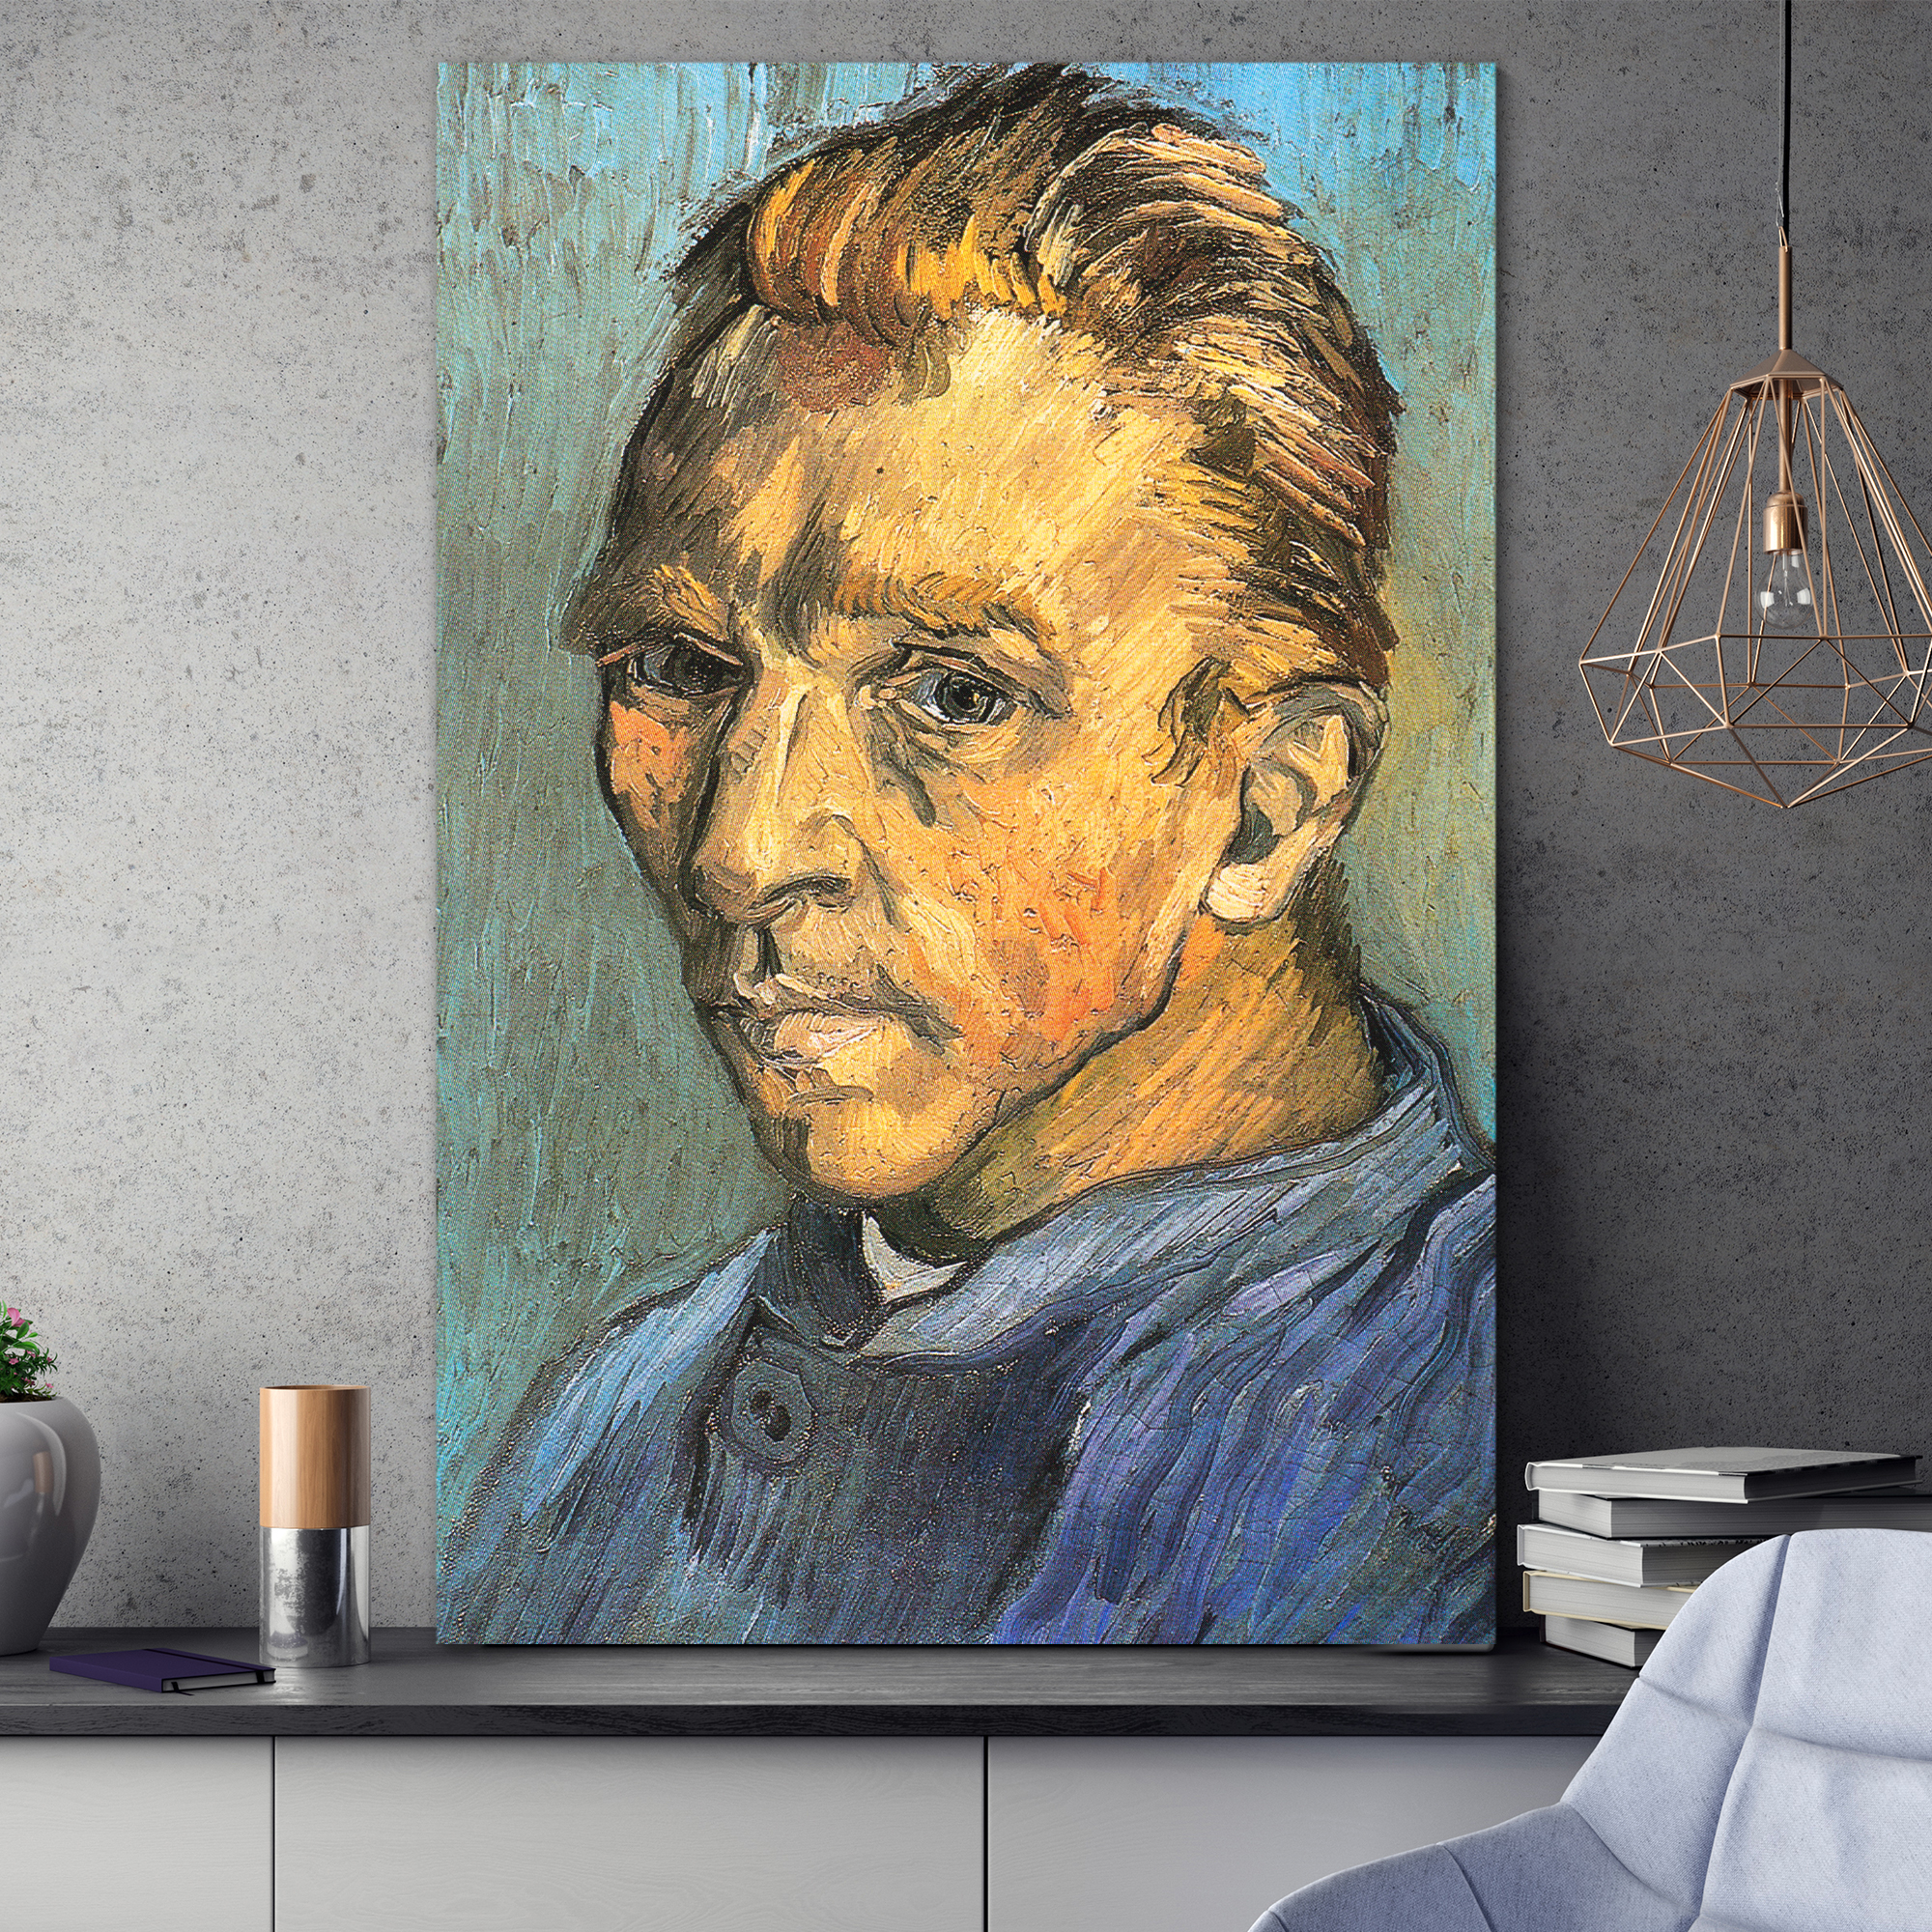 Self Portrait by Vincent Van Gogh - Oil Painting Reproduction on Canvas Prints Wall Art, Ready to Hang - 24